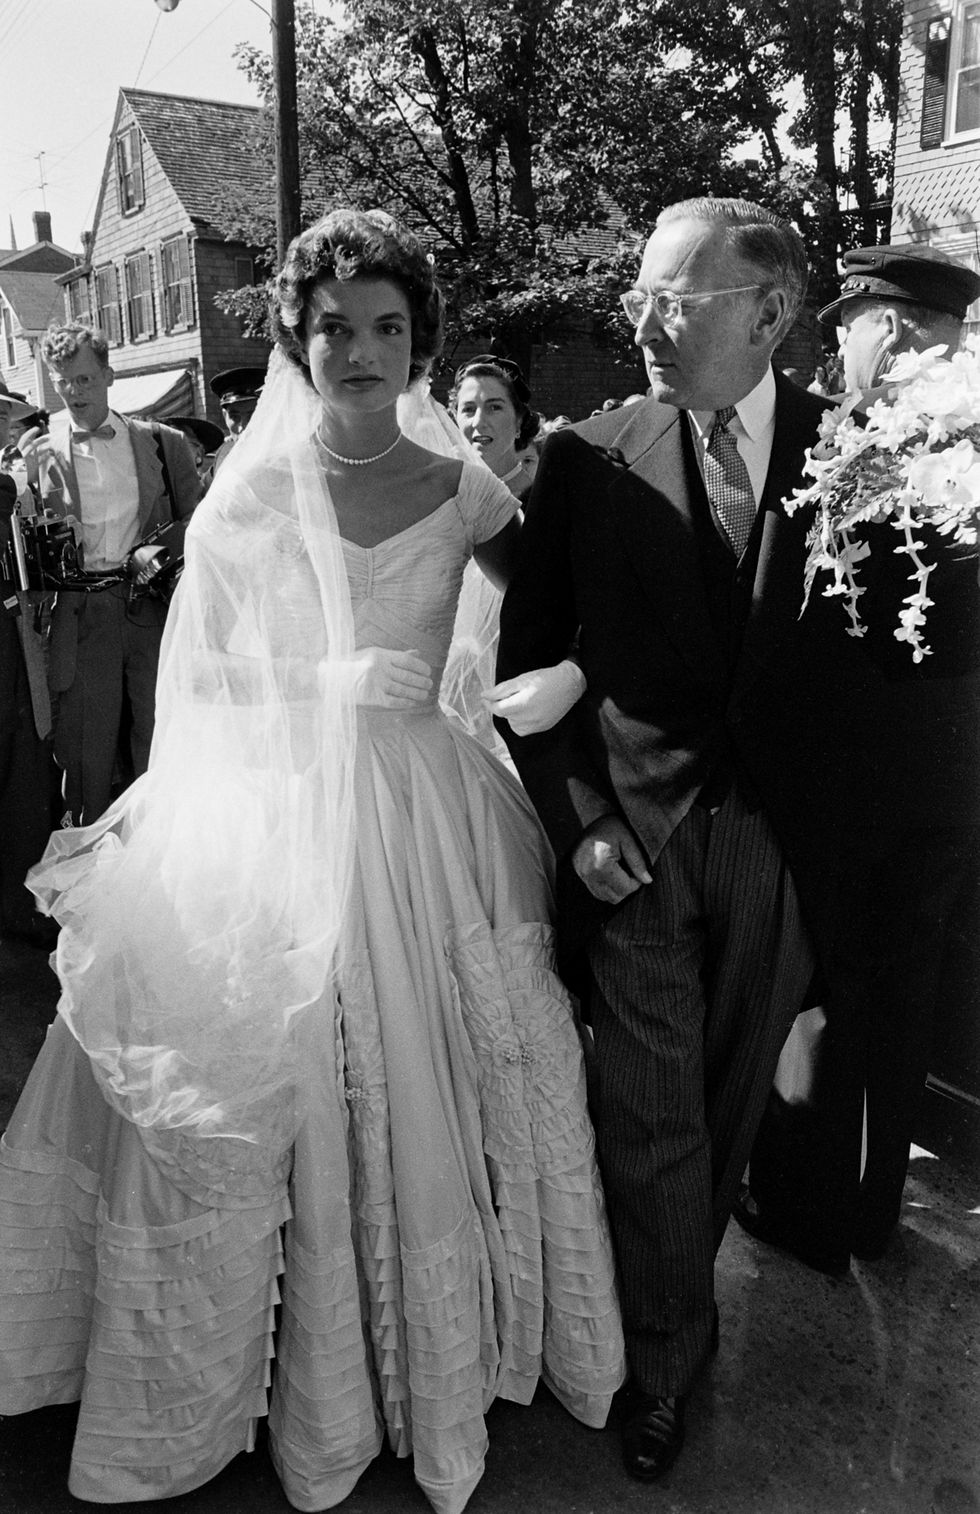 Jacqueline Kennedy is escorted to St Mary's Church by her stepfather, Hugh D Auchincloss for her wedding to John F Kennedy.